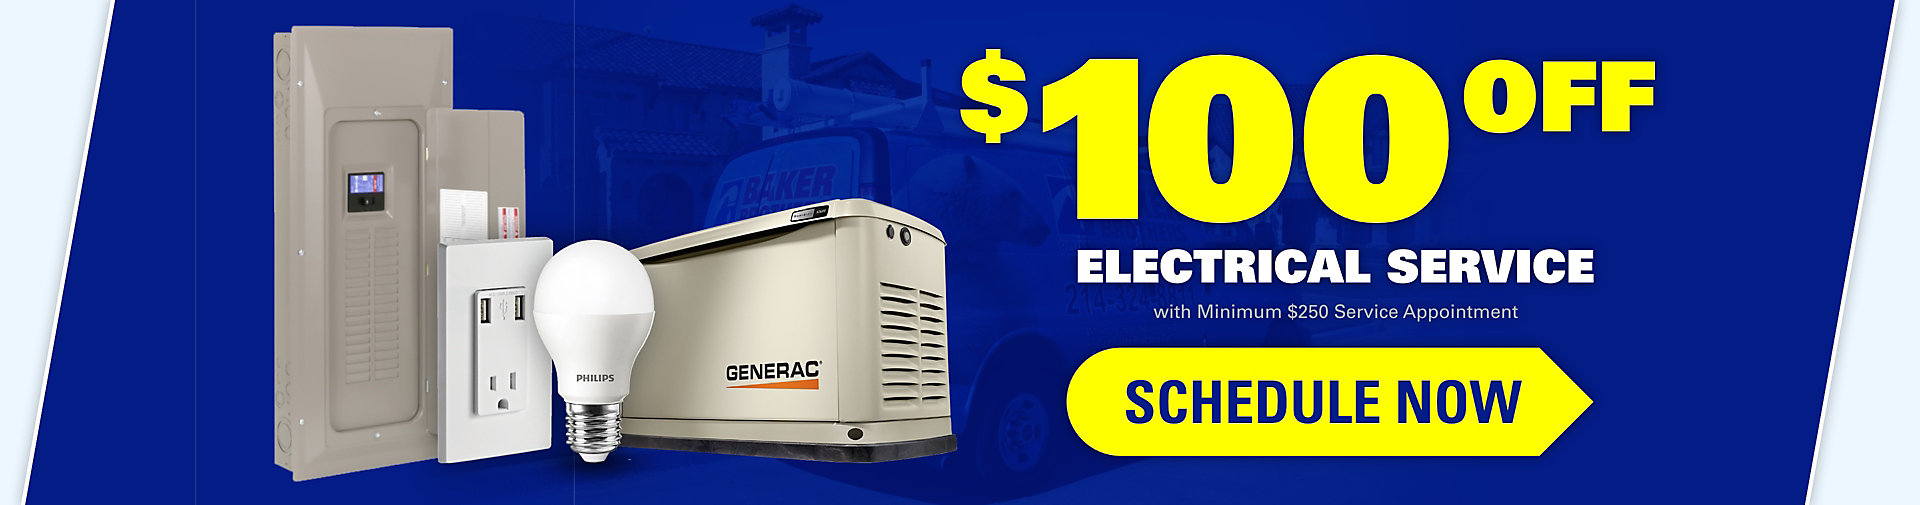 Save $100 on Electrical Service